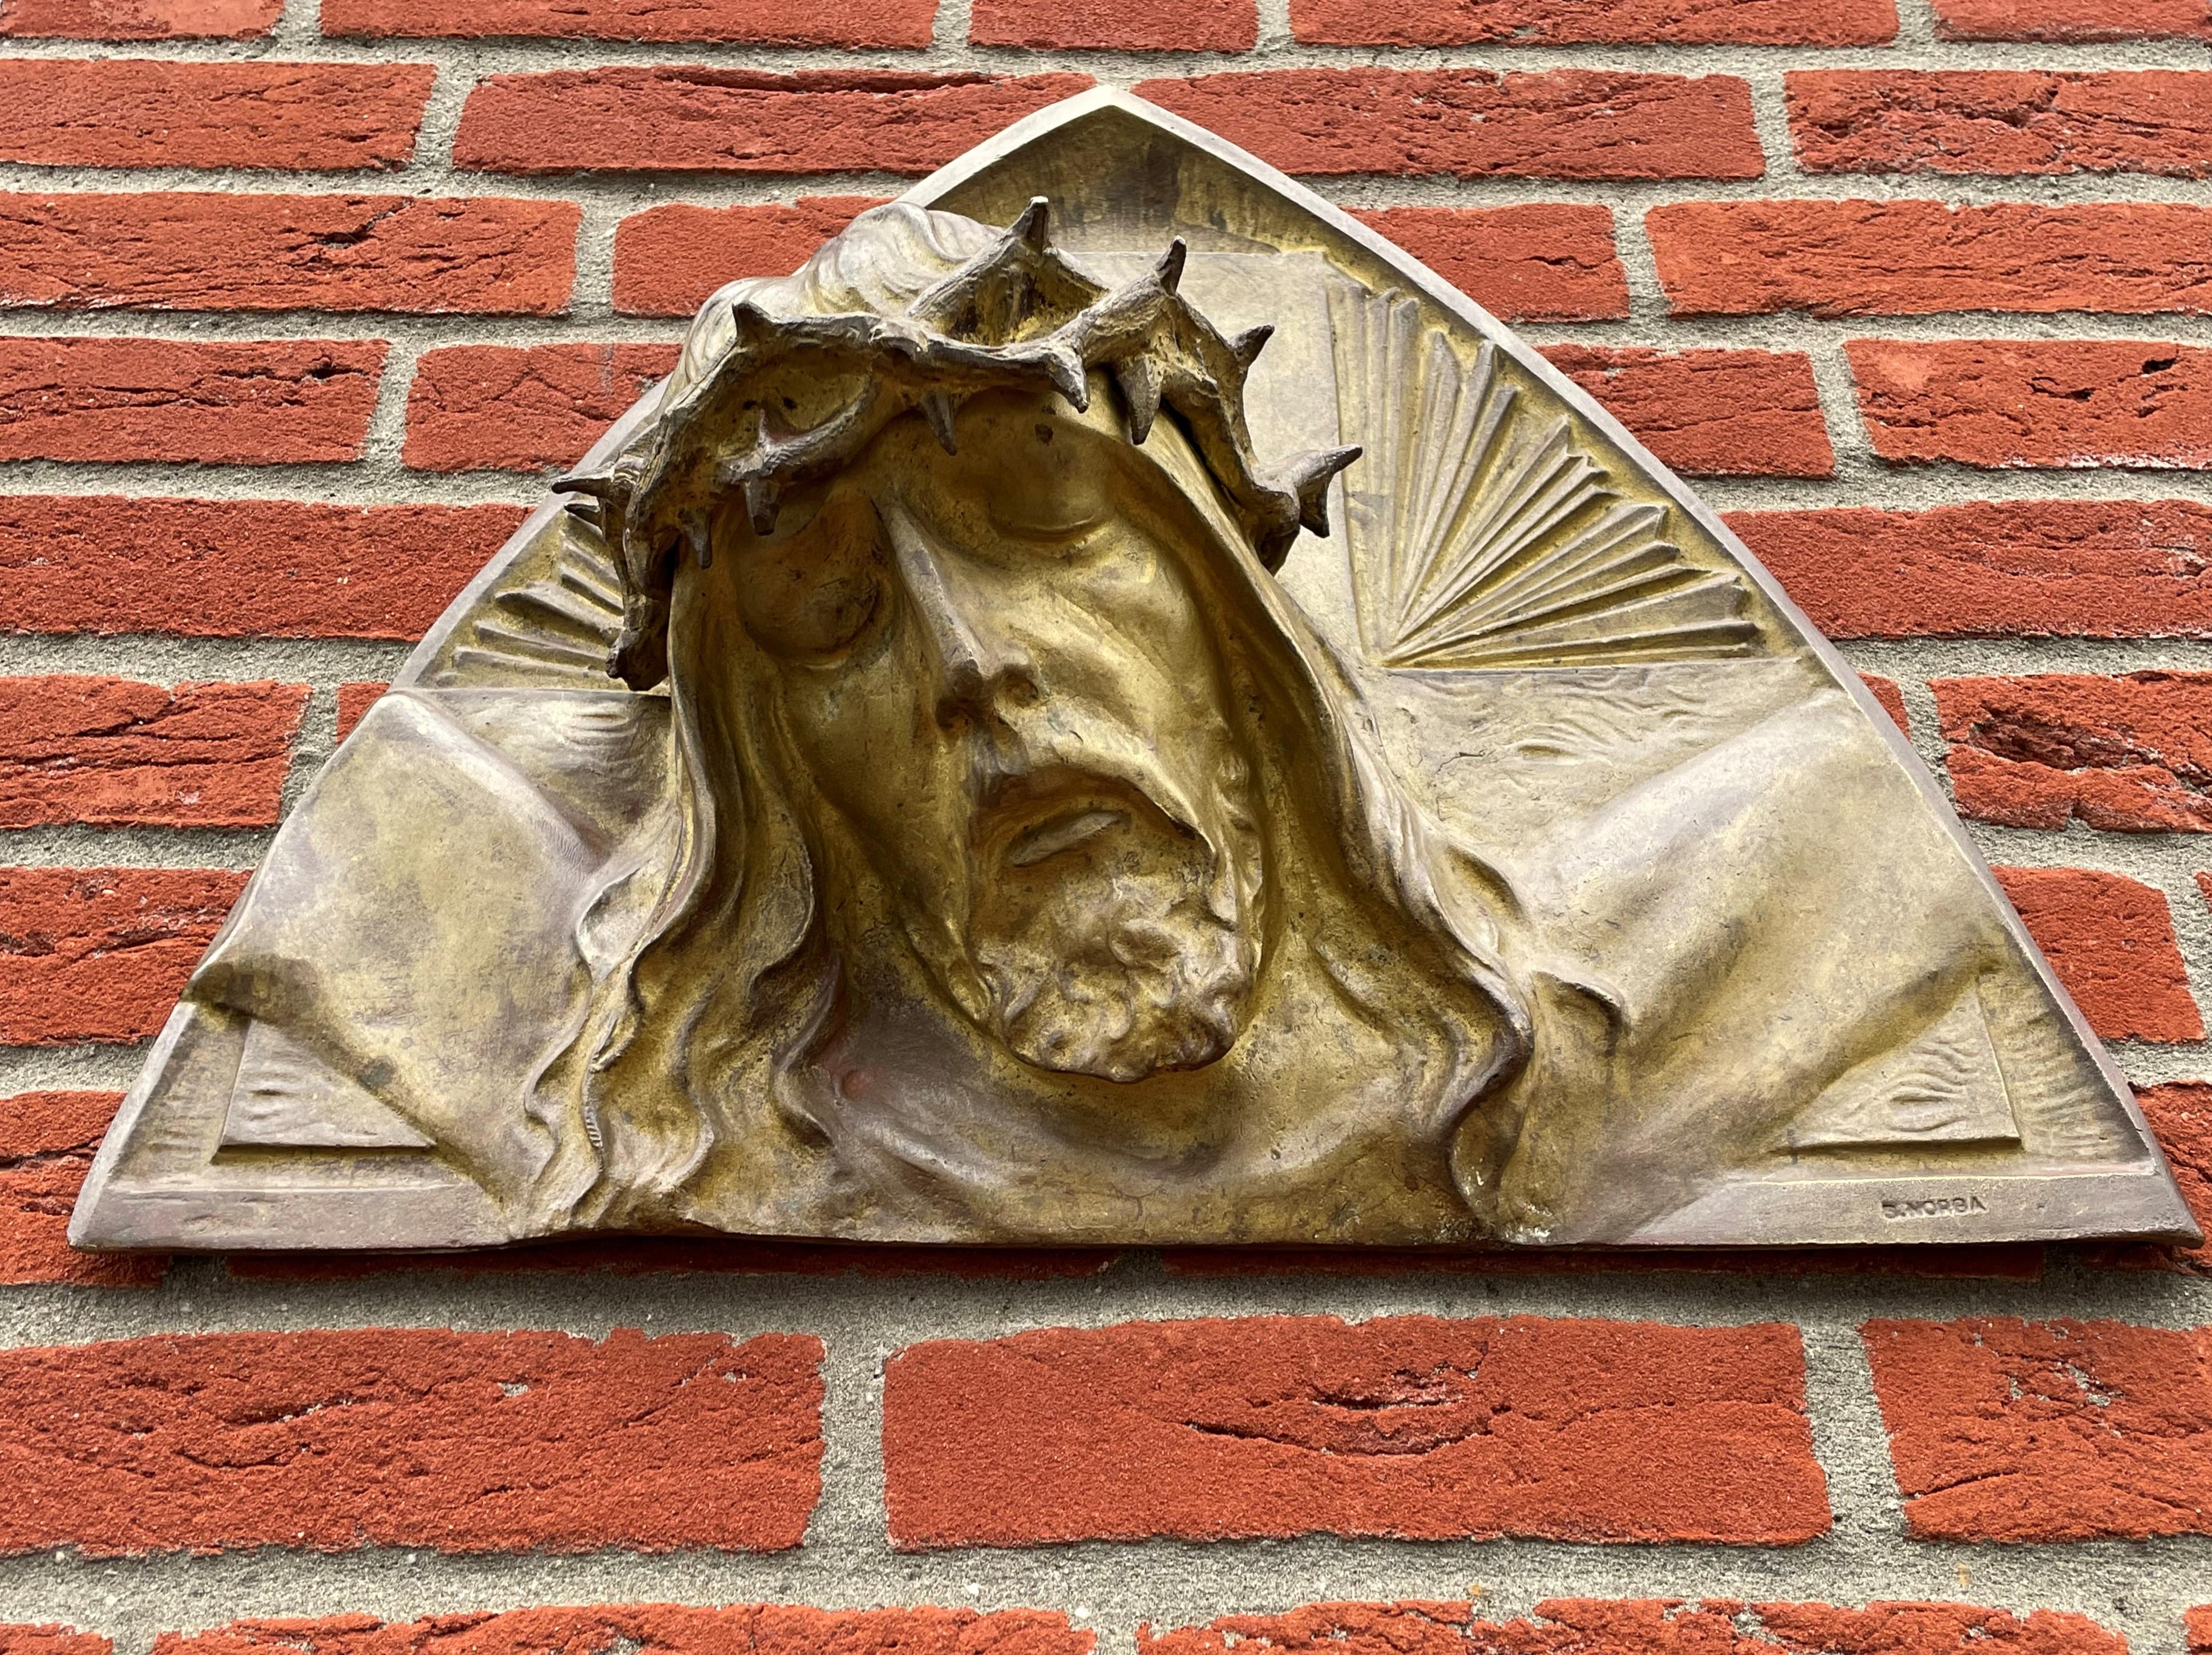 Cast Gilt Bronze Art Deco Wall Sculpture of Christ with Crown of Thorns by S. Norga